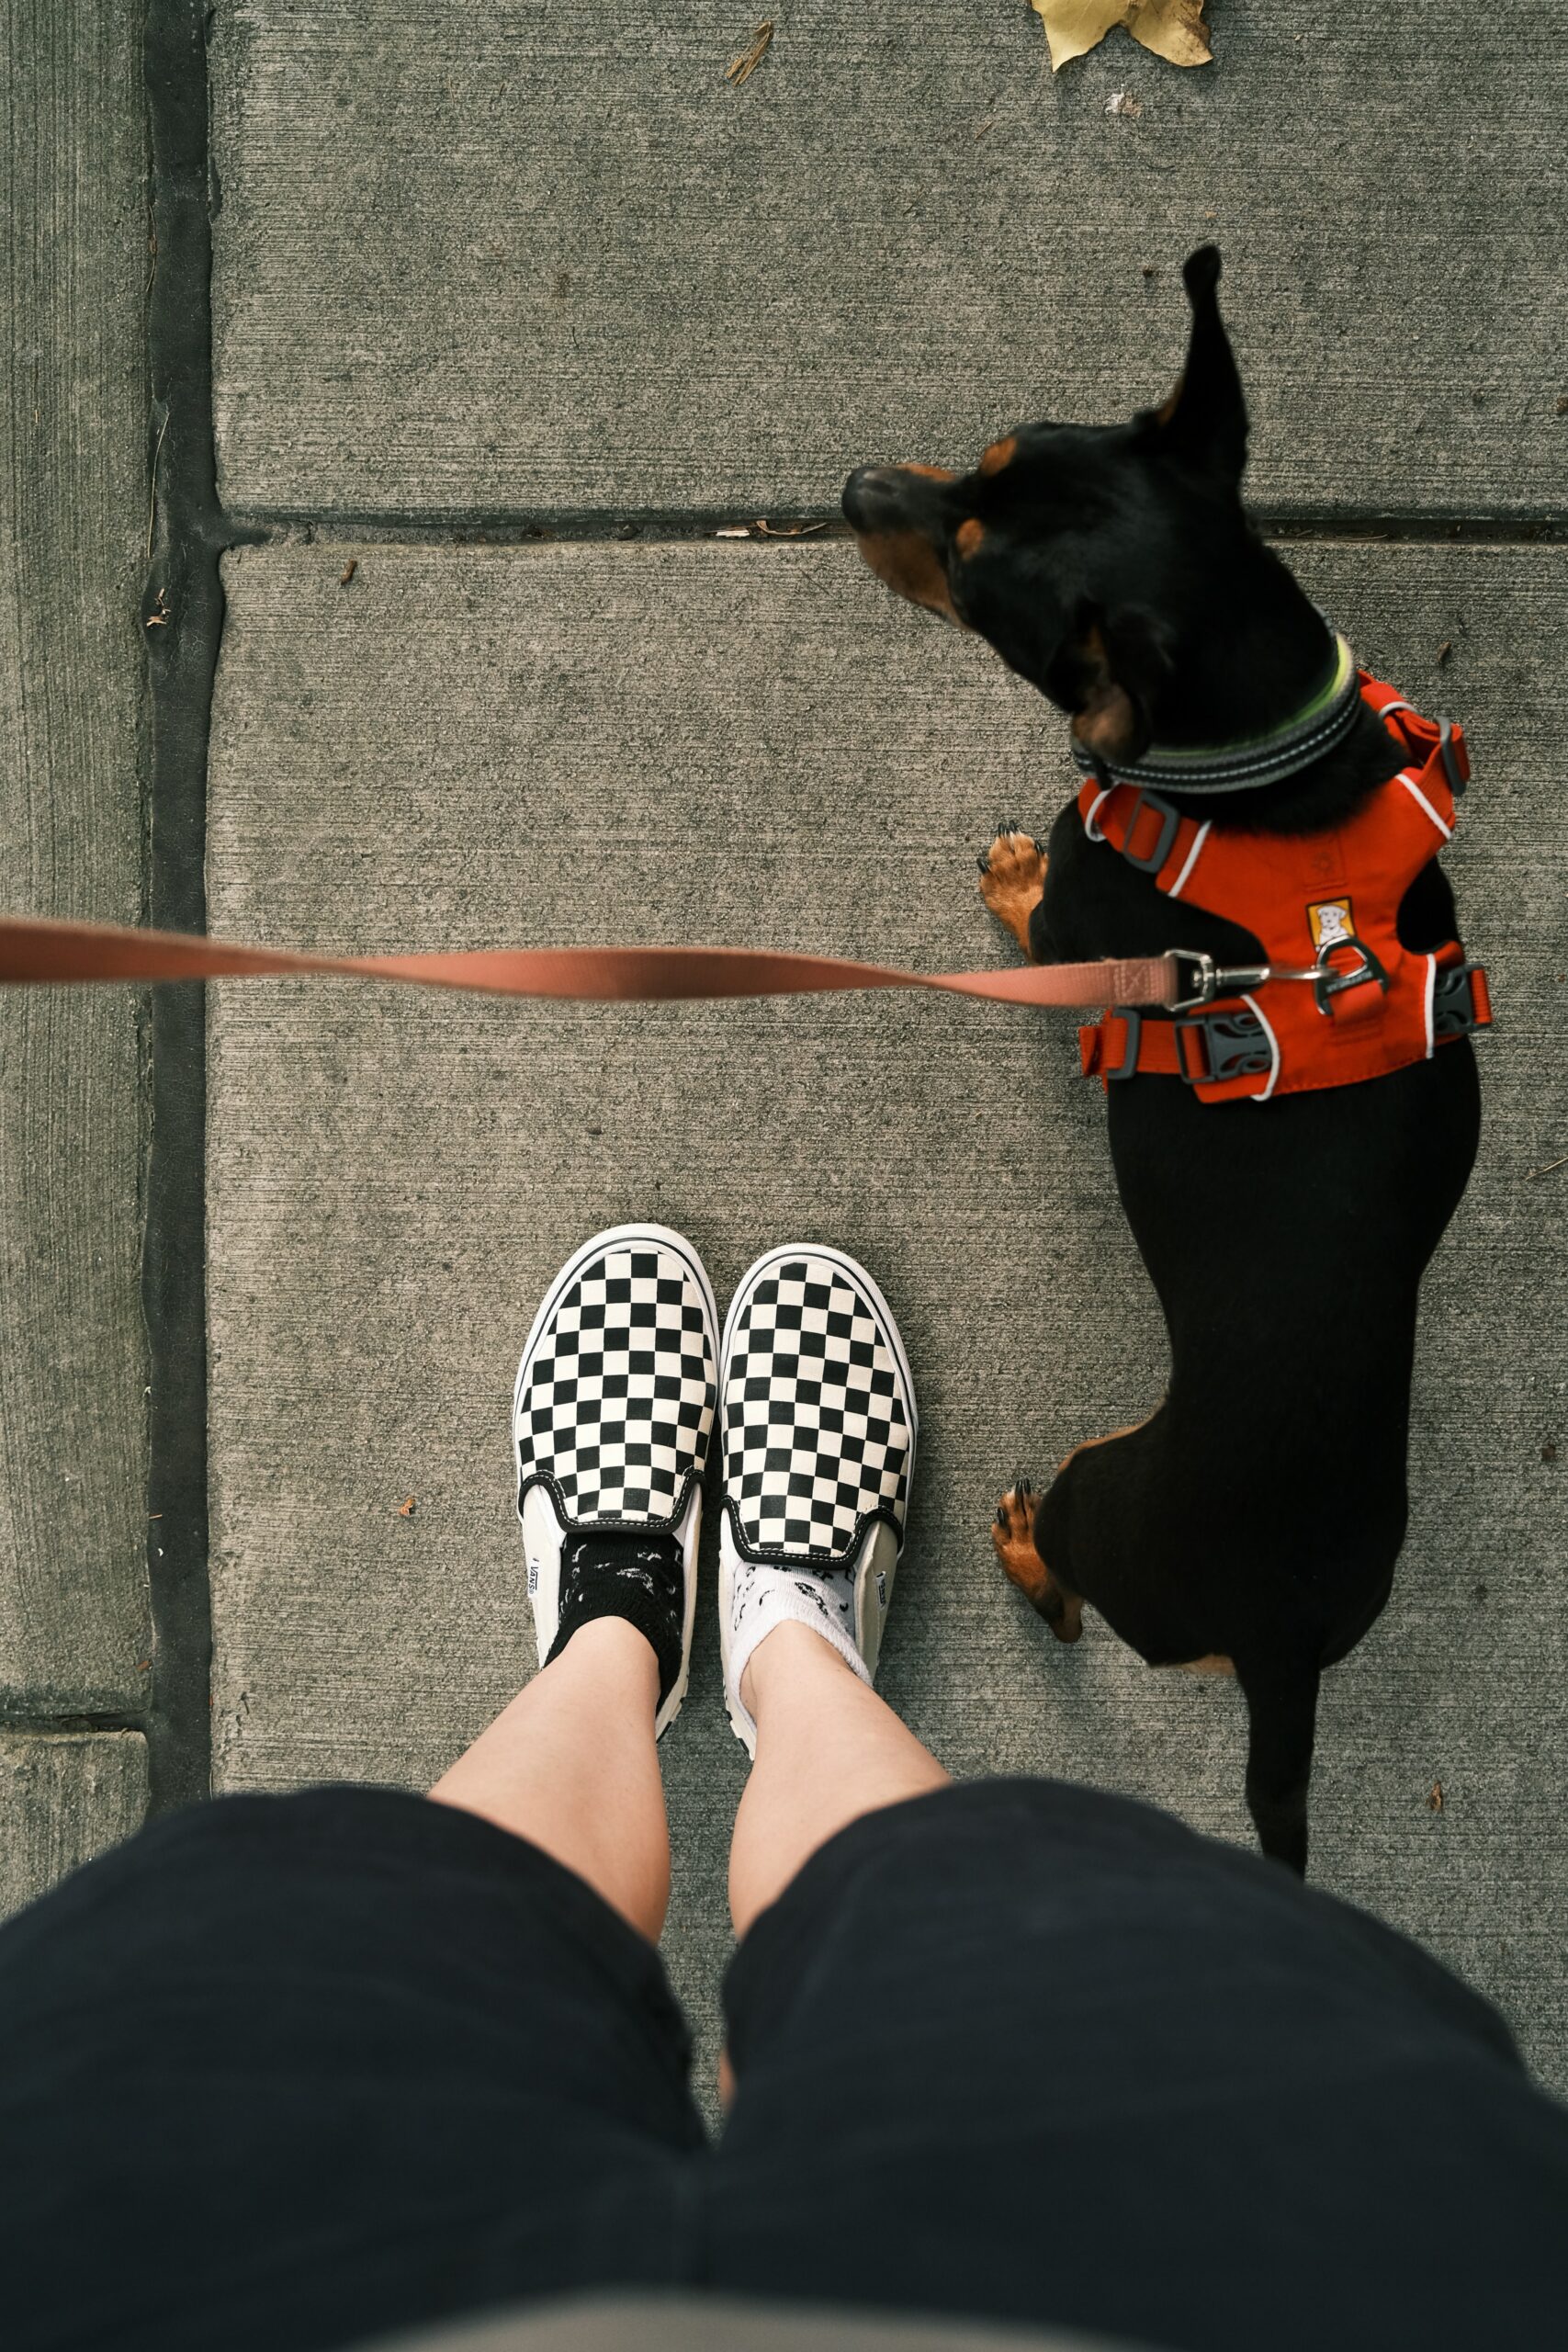 5 Reasons To Consider a Dog Walking Business